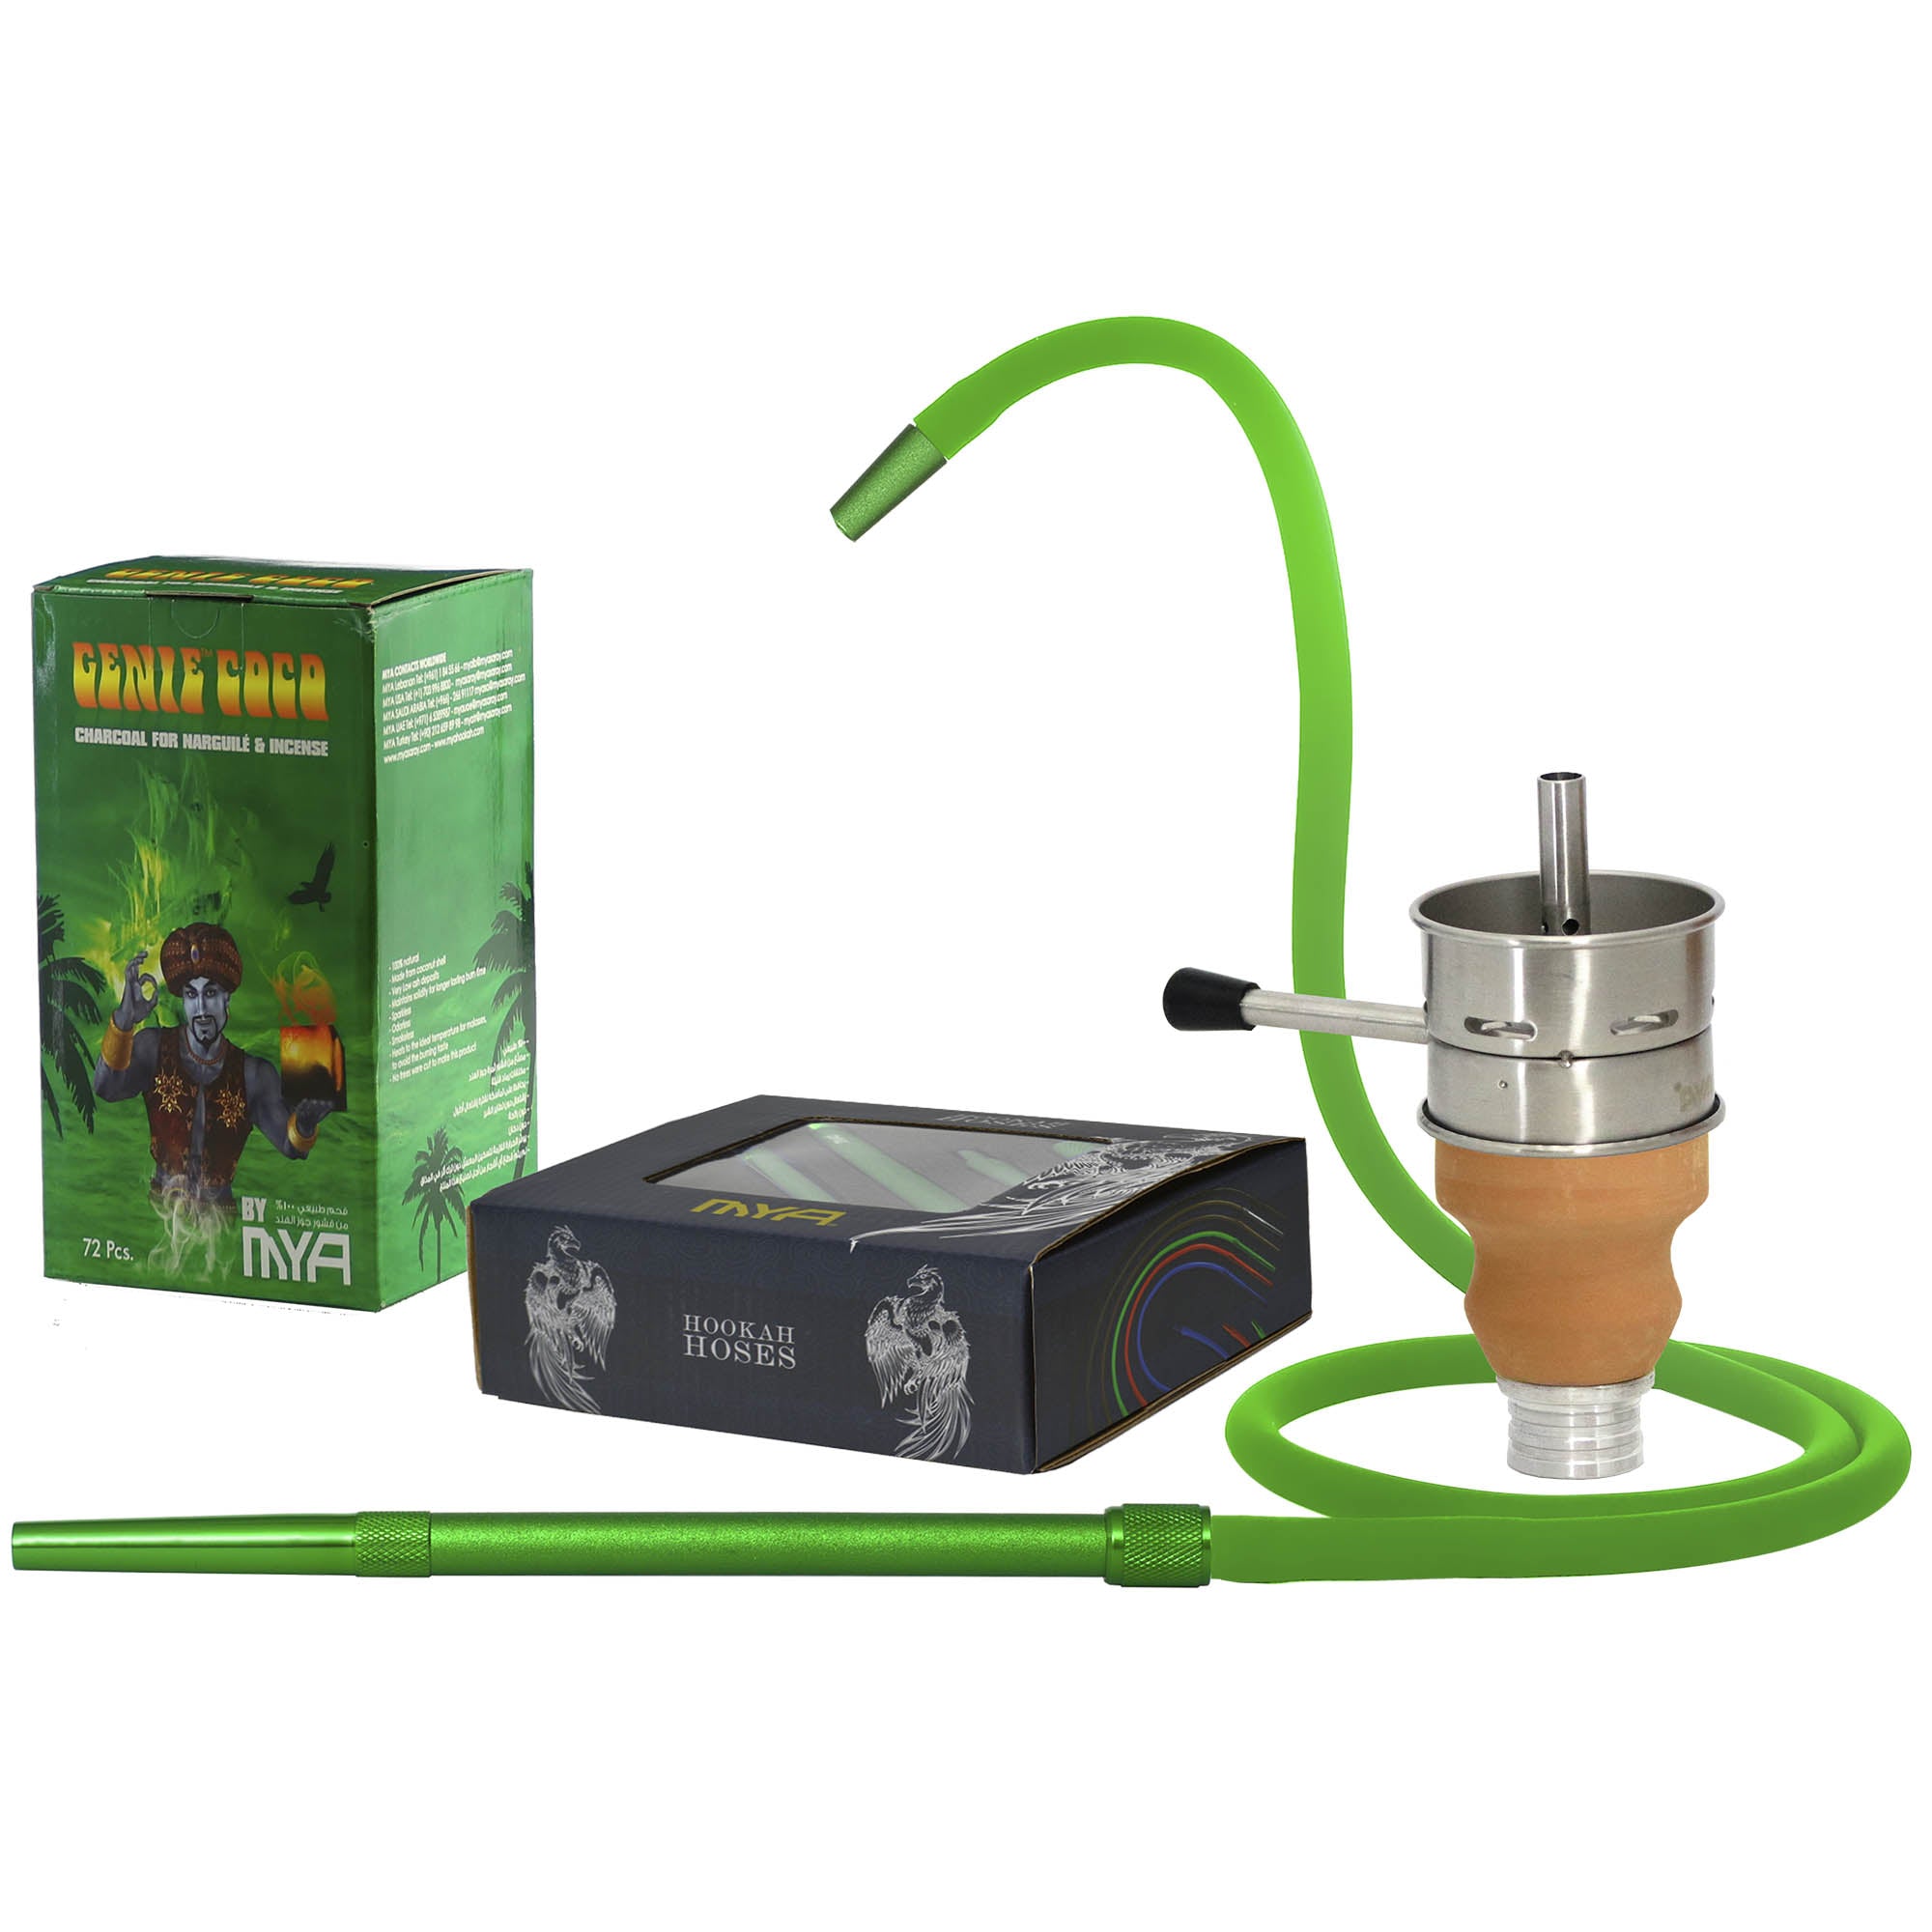 Accessories set includes Green Genie Coco 72 pieces charcoal, Green 668 hose and a Fornello +980L Set #Color_Green